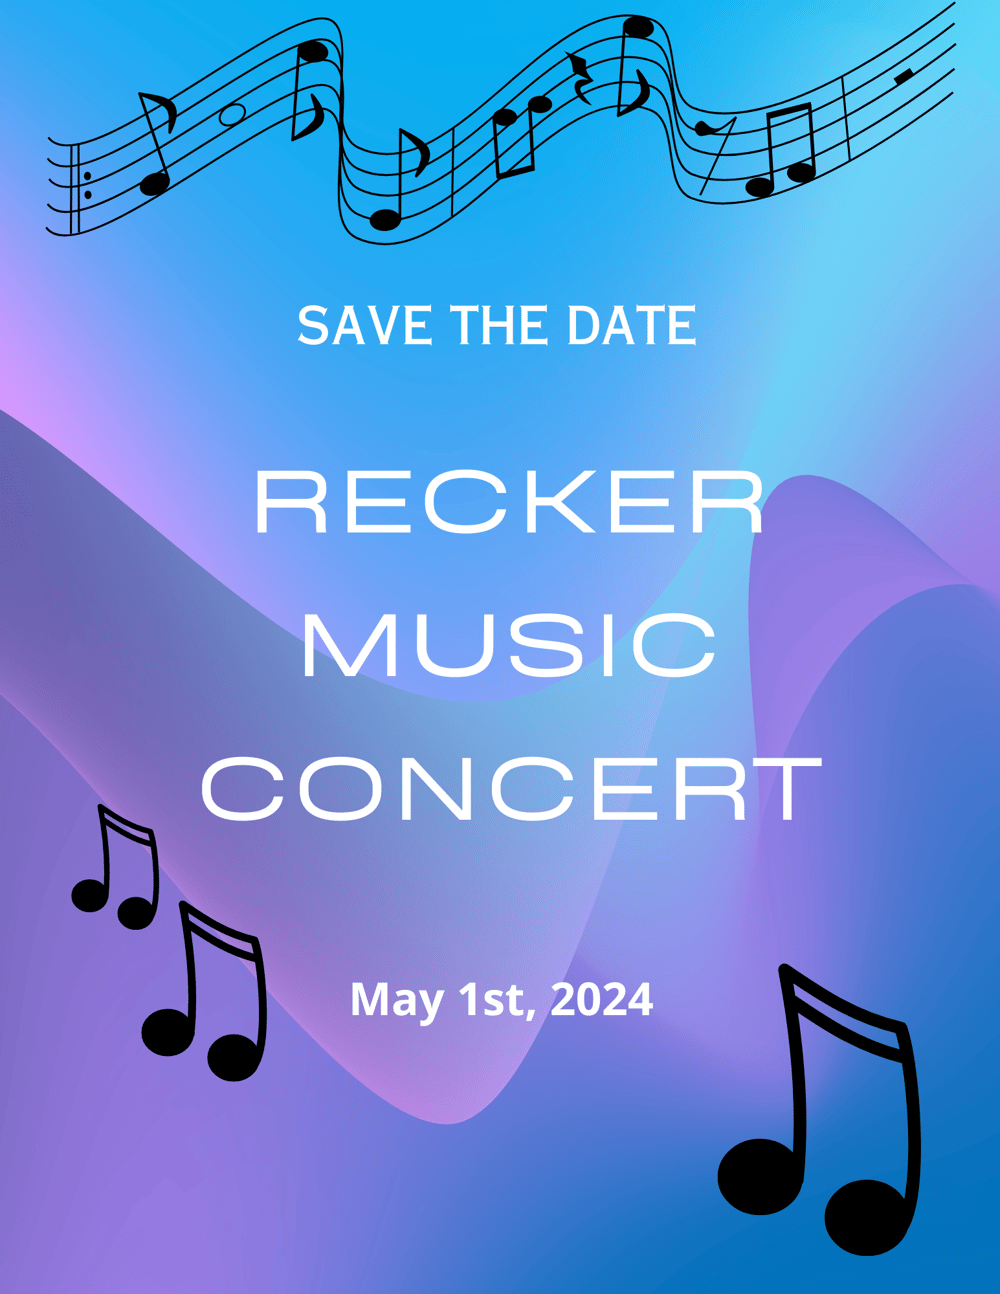 Music Concert Save the Date